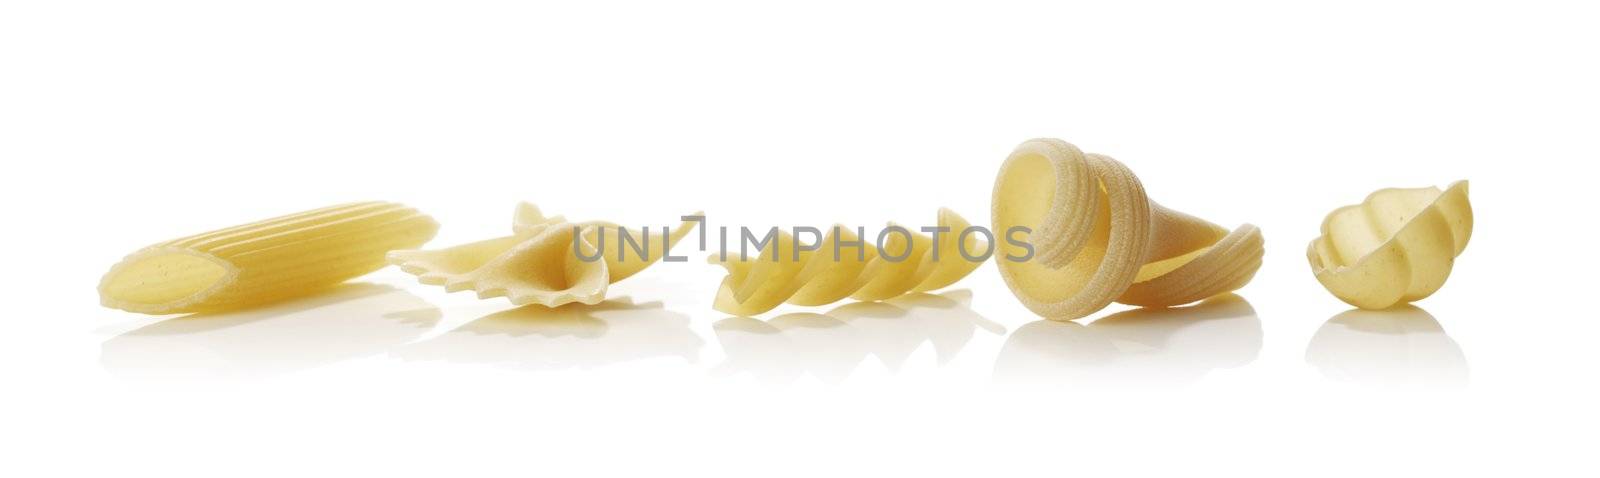 Different shapes of raw dried pasta isolated on white with reflections.